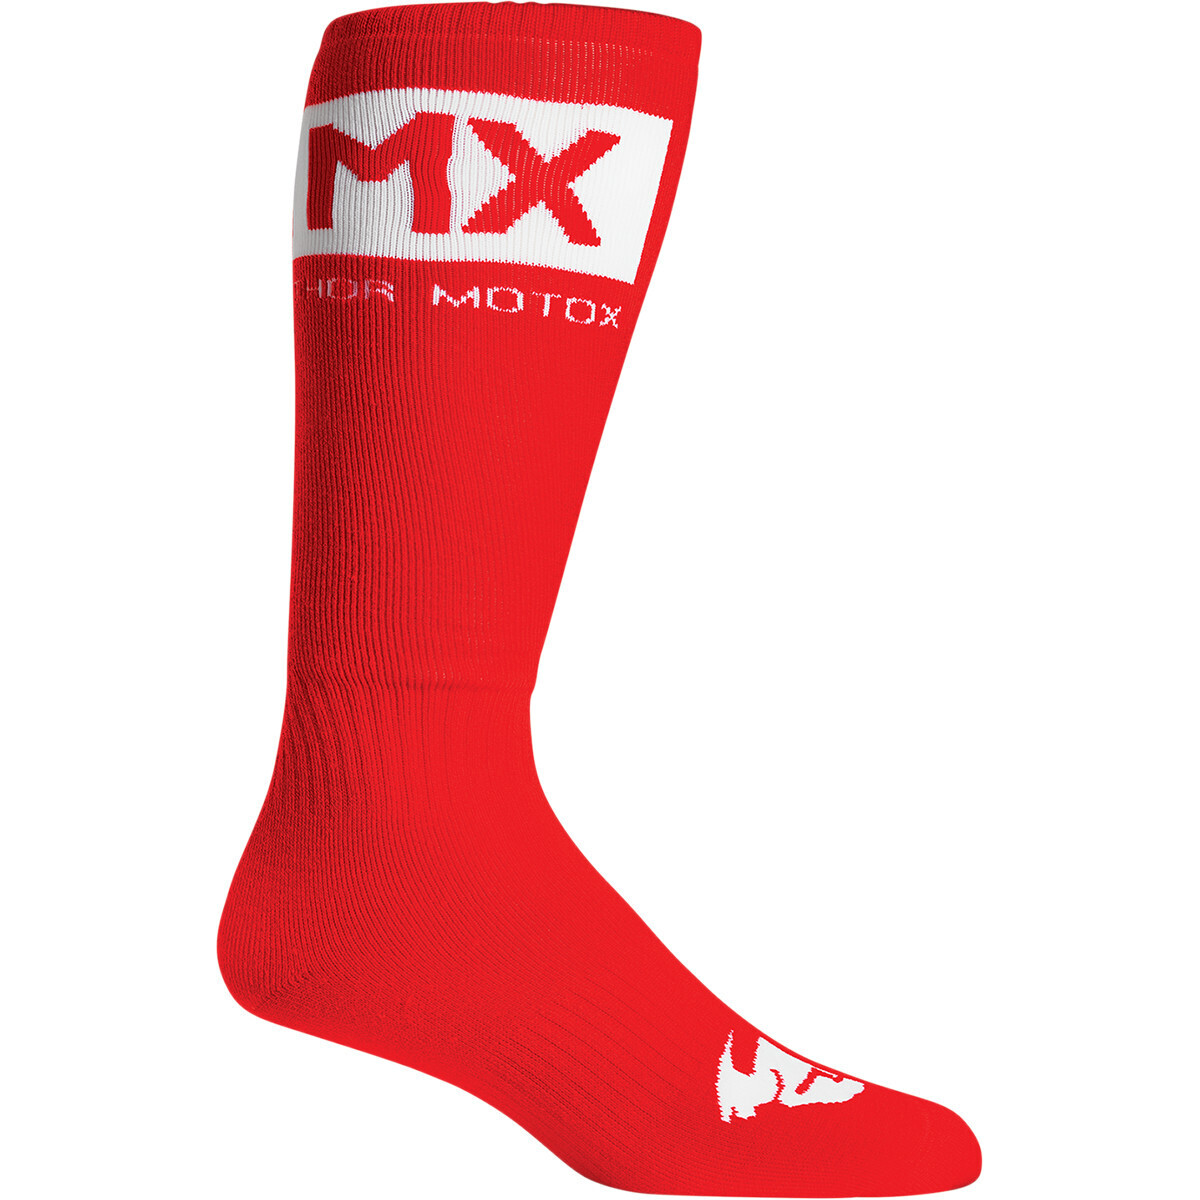 HOR
Youth MX Solid Socks - Red/White - Size 1-7 (EU32-39)